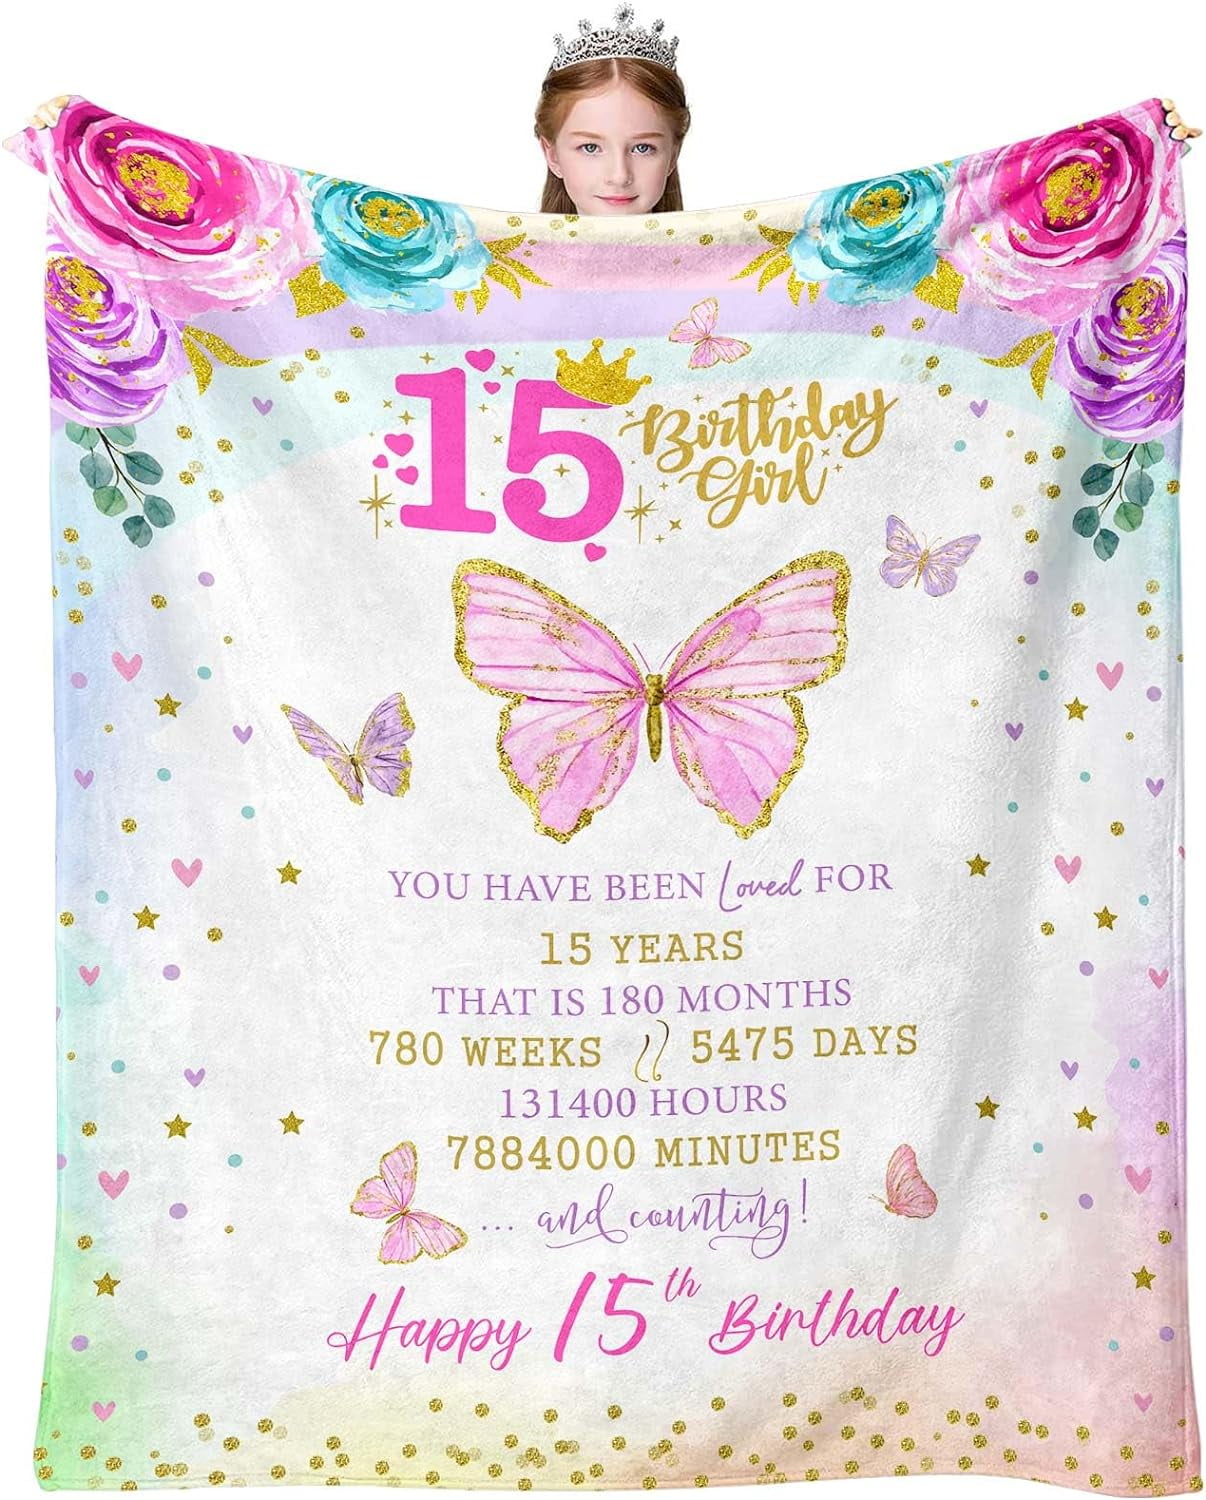 The Best 16th Birthday Gift Ideas for Girls - FamilyEducation